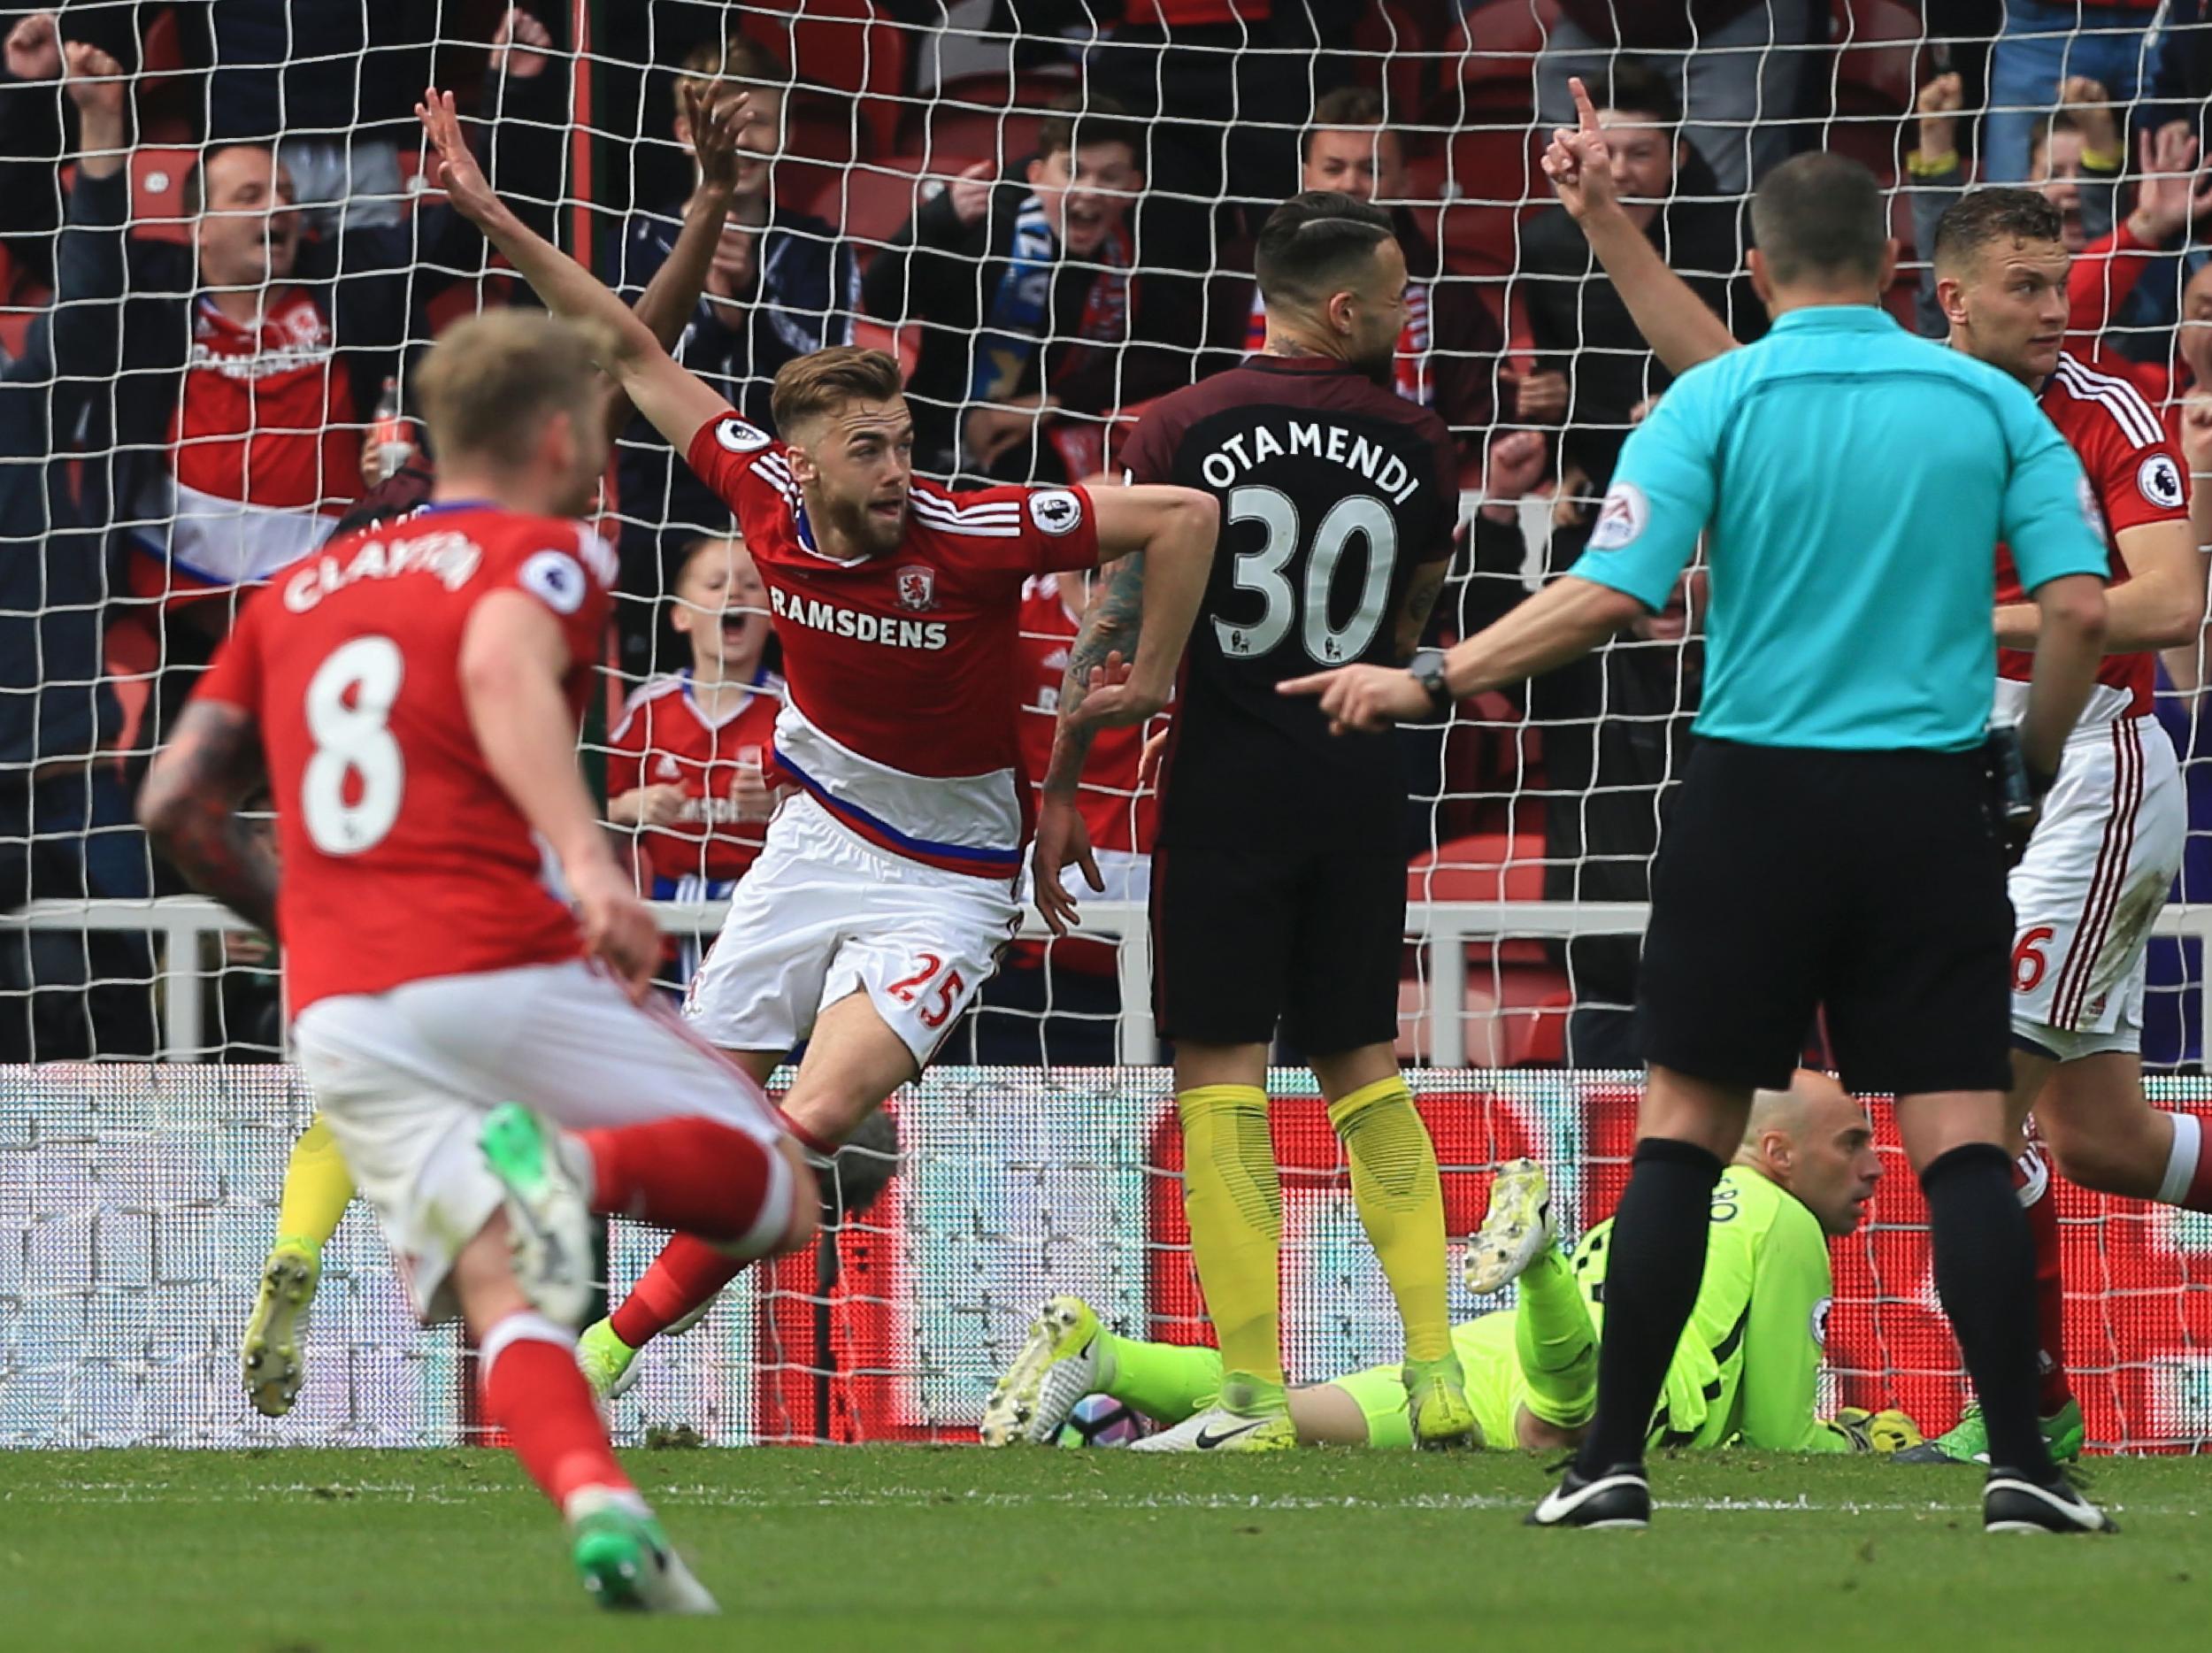 Chambers was as surprised as anyone when he restored Boro's lead